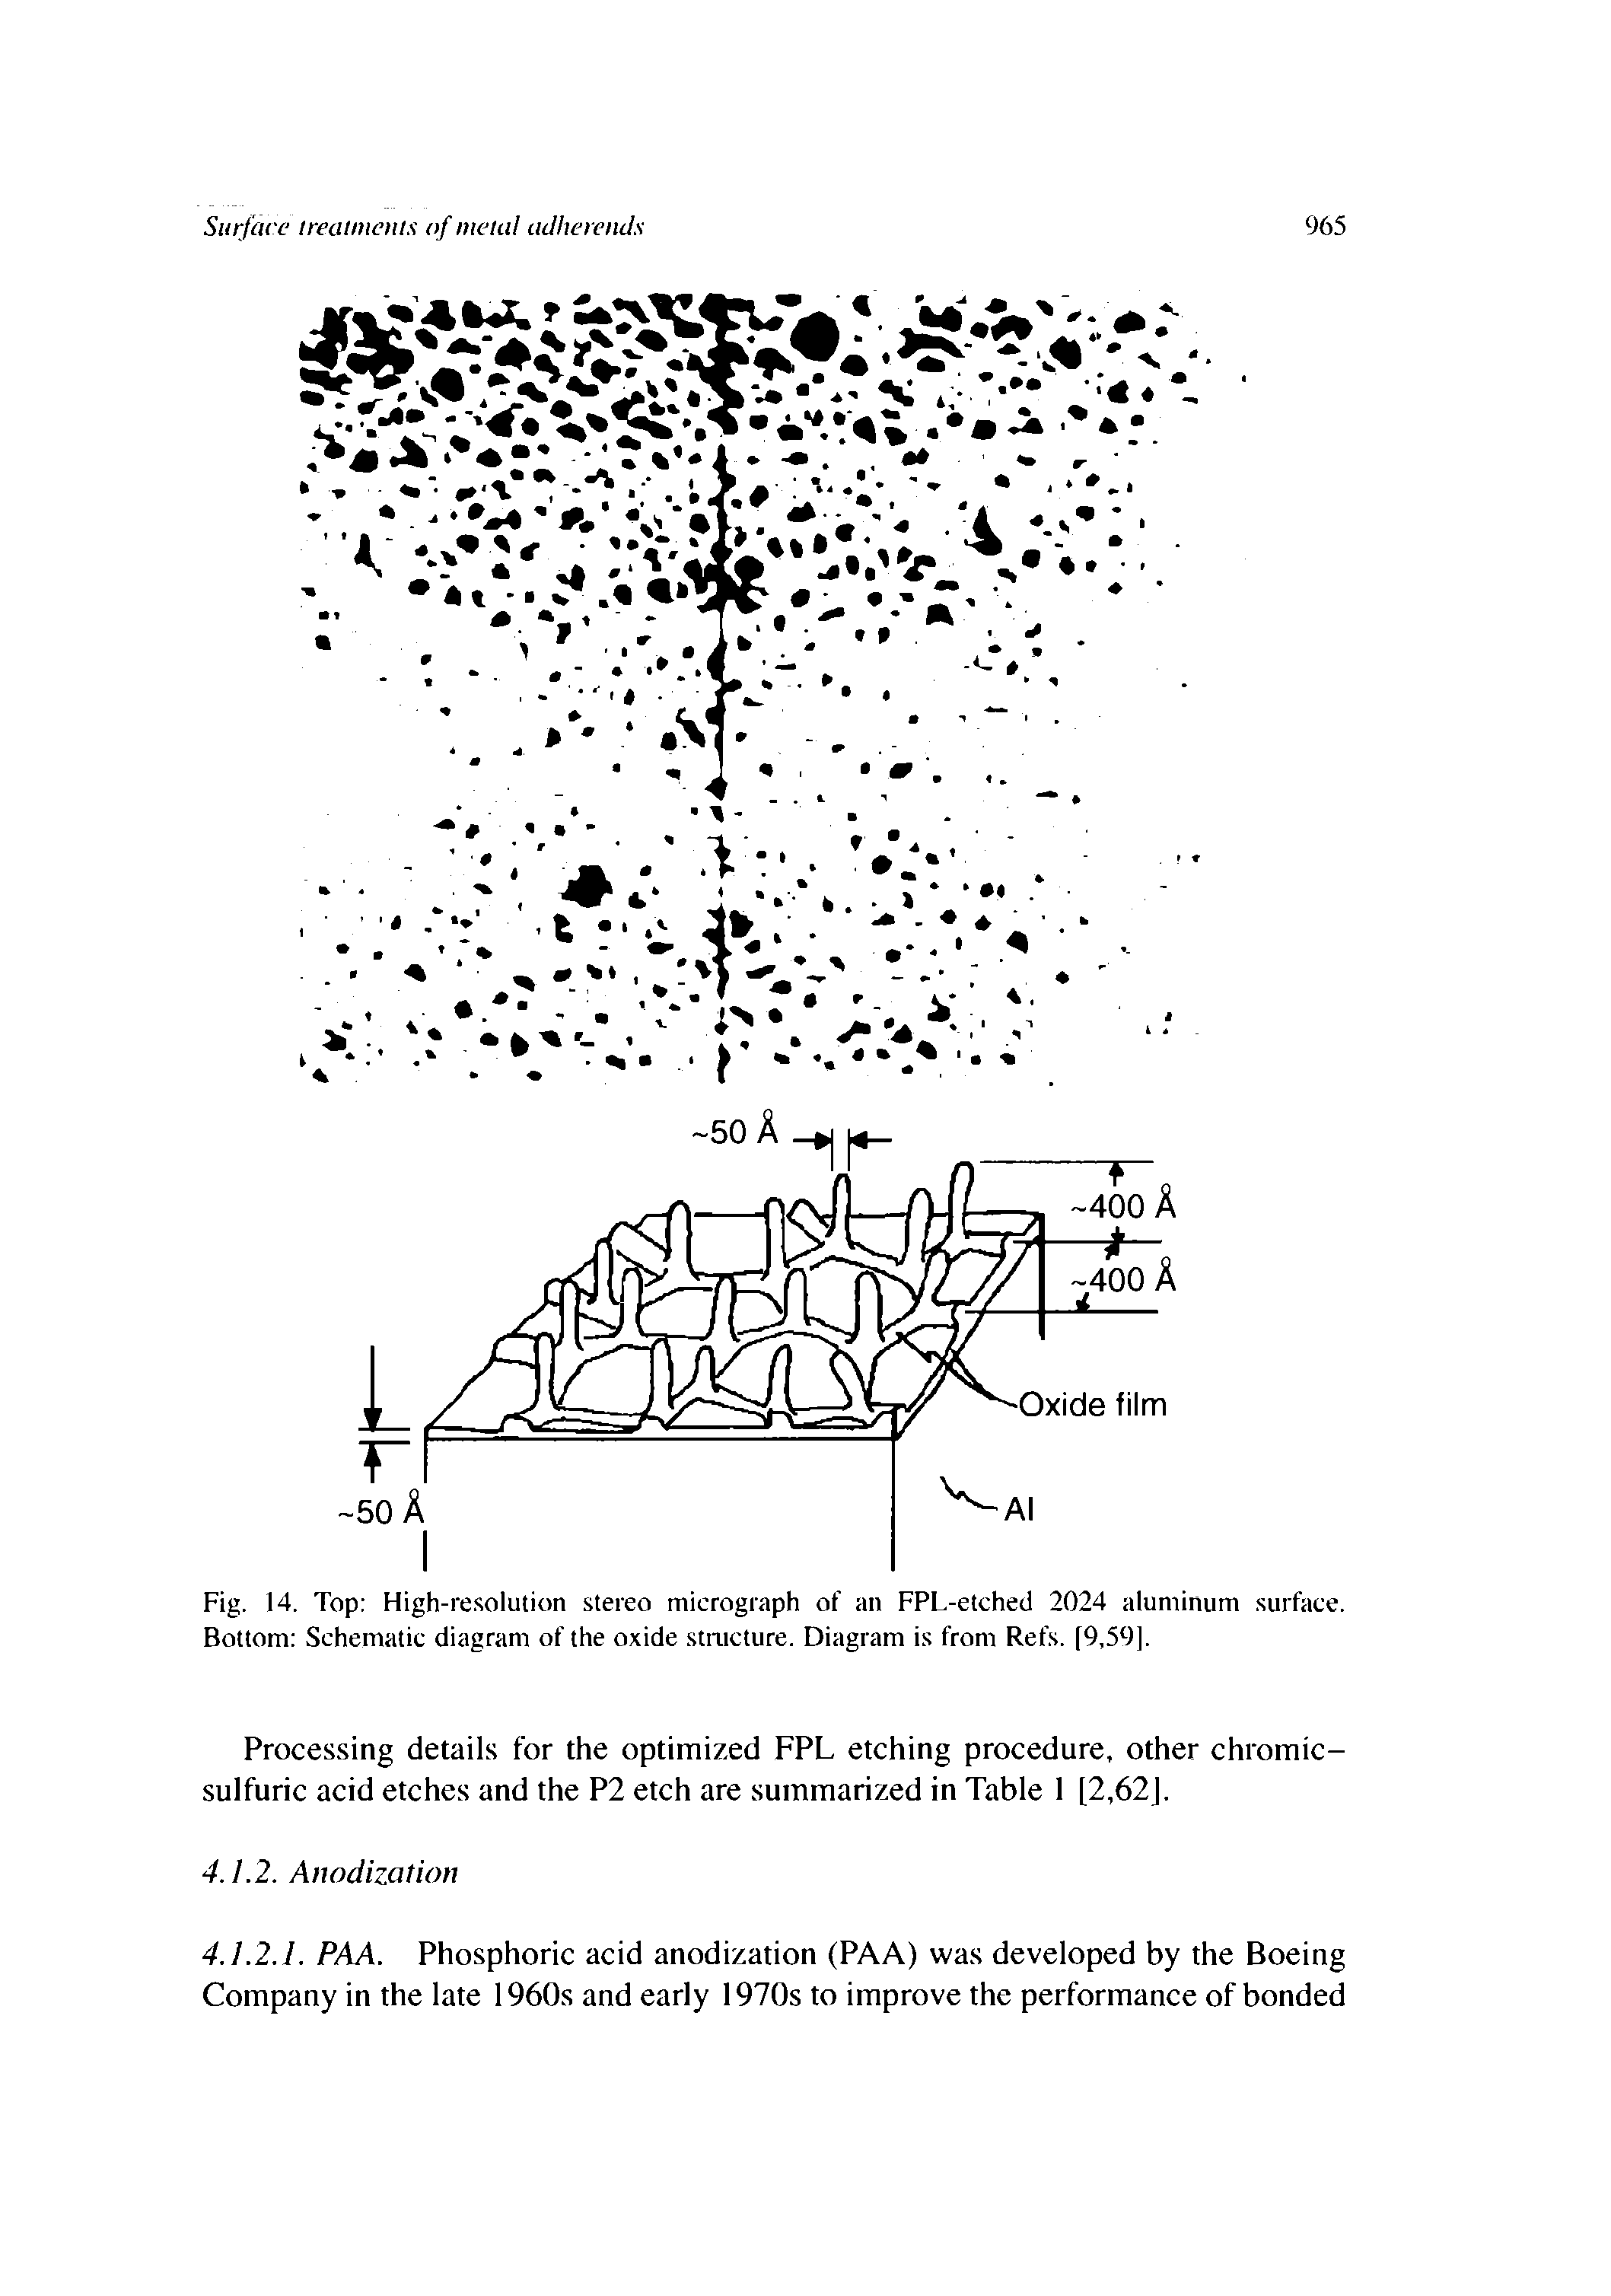 Fig. 14. Top High-resolution stereo micrograph of an FPL-etched 2024 aluminum surface. Bottom Schematic diagram of the oxide stmcture. Diagram is from Refs. [9,59].